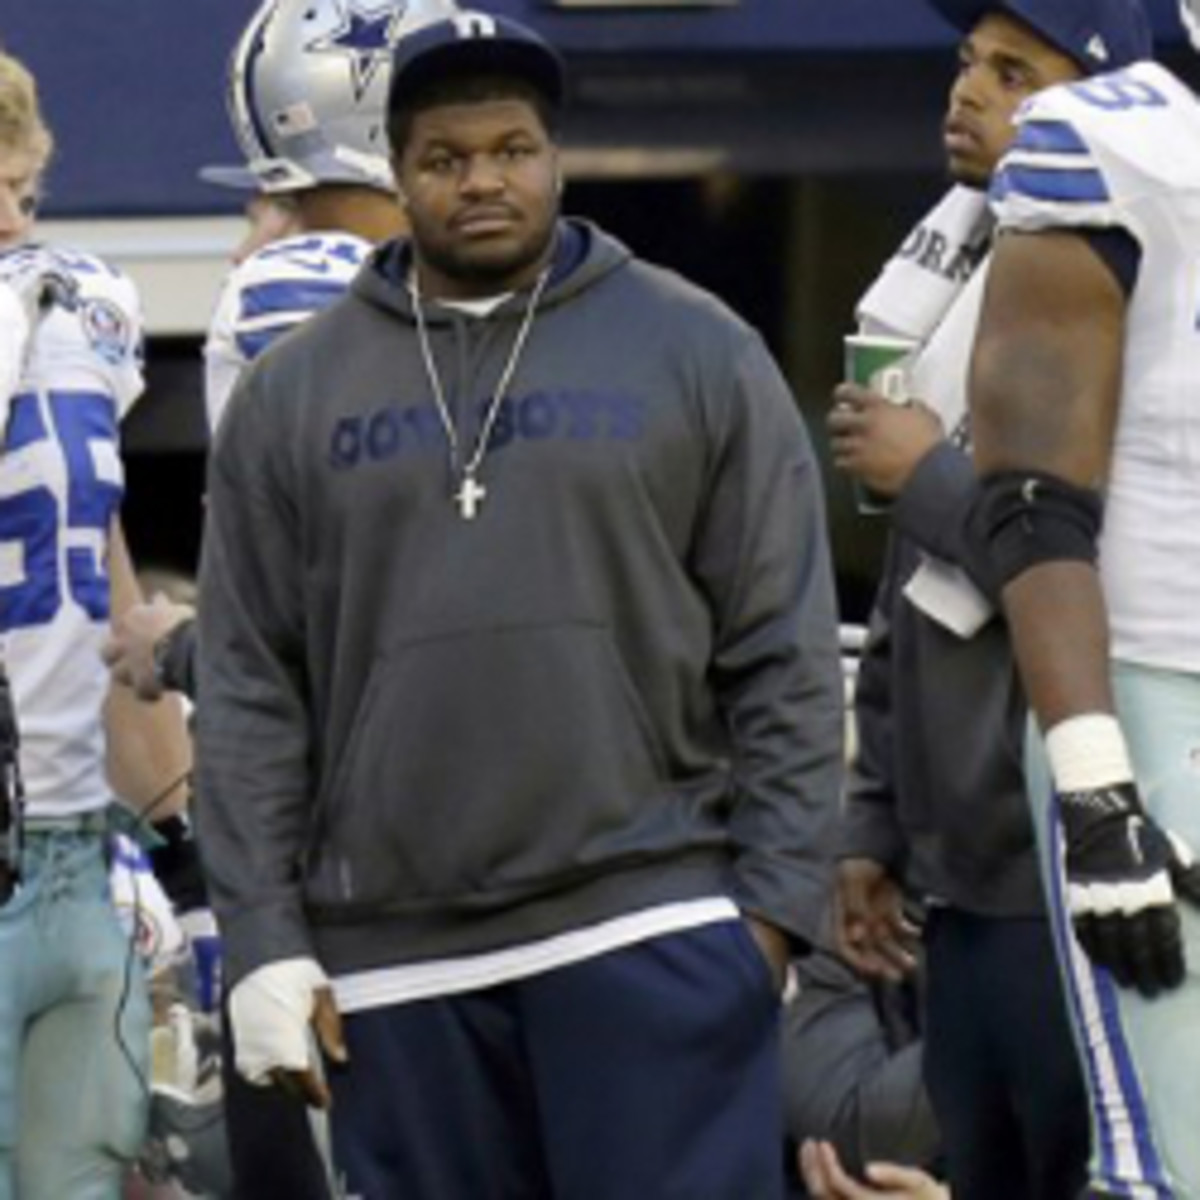 Josh Brent appeared on the Cowboys sidelines the week after a crash that killed teammate Jerry Brown. (AP)